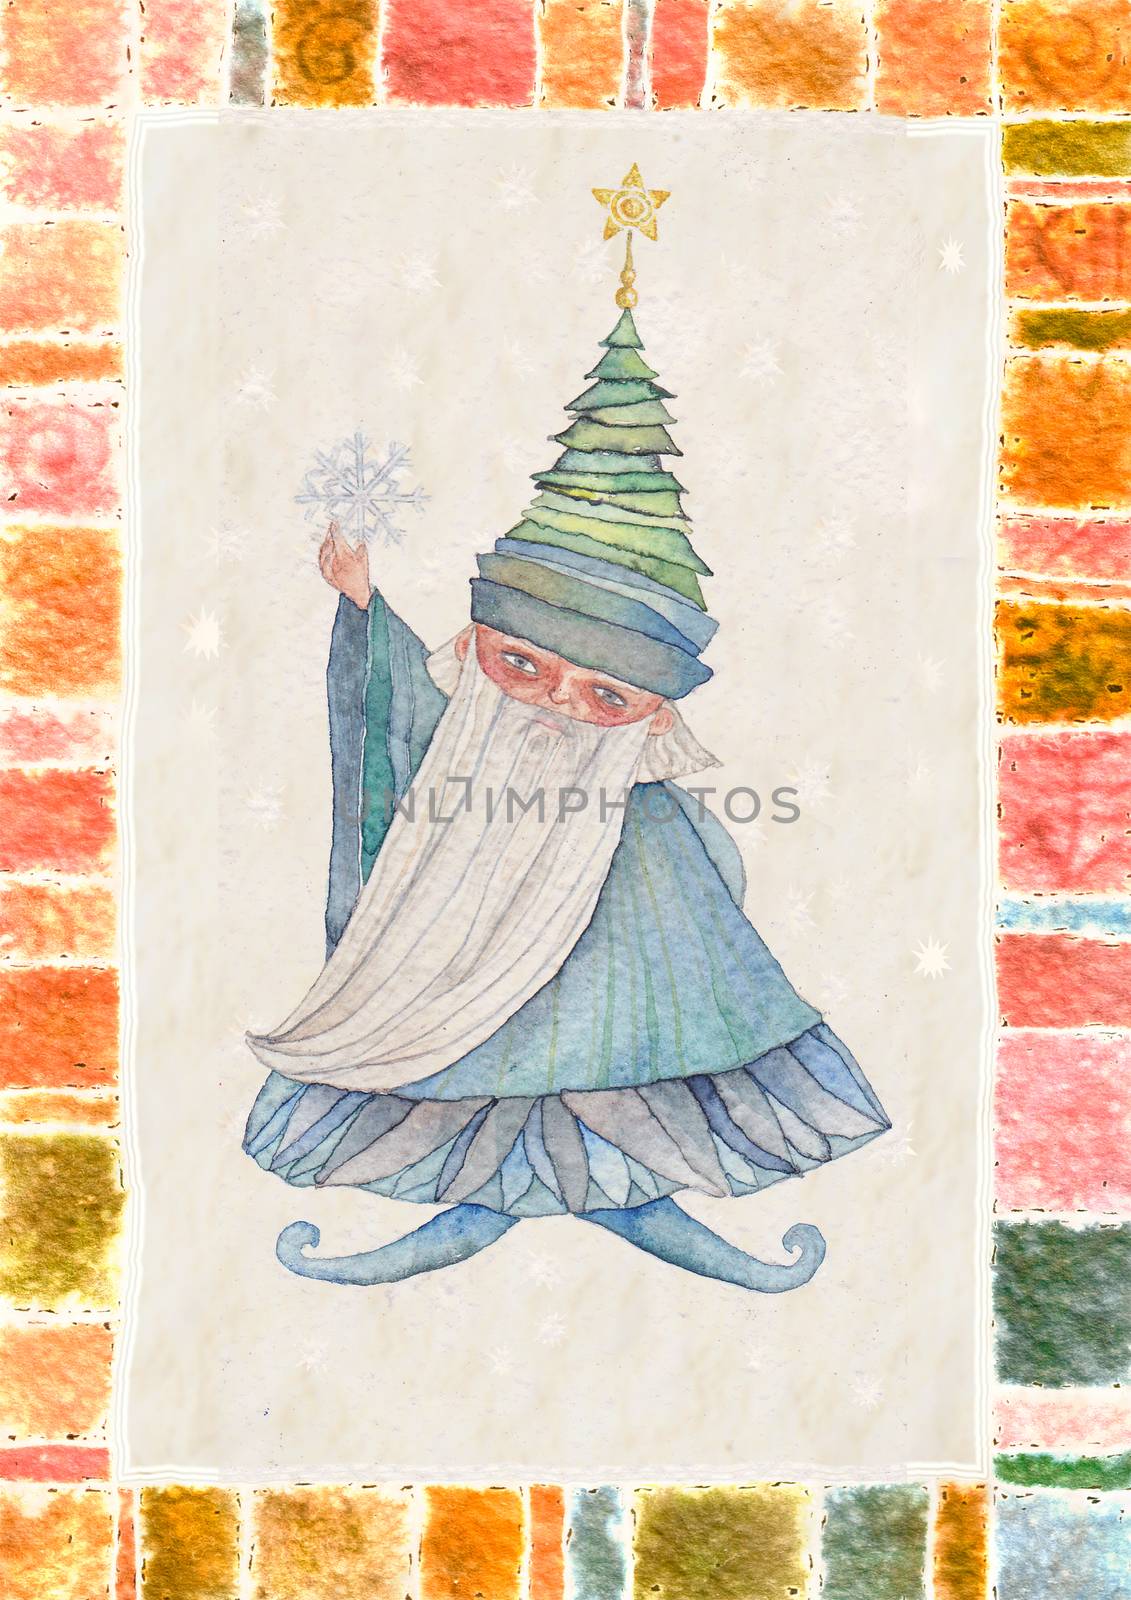 Watercolor illustration of Mr. Winter by vimasi